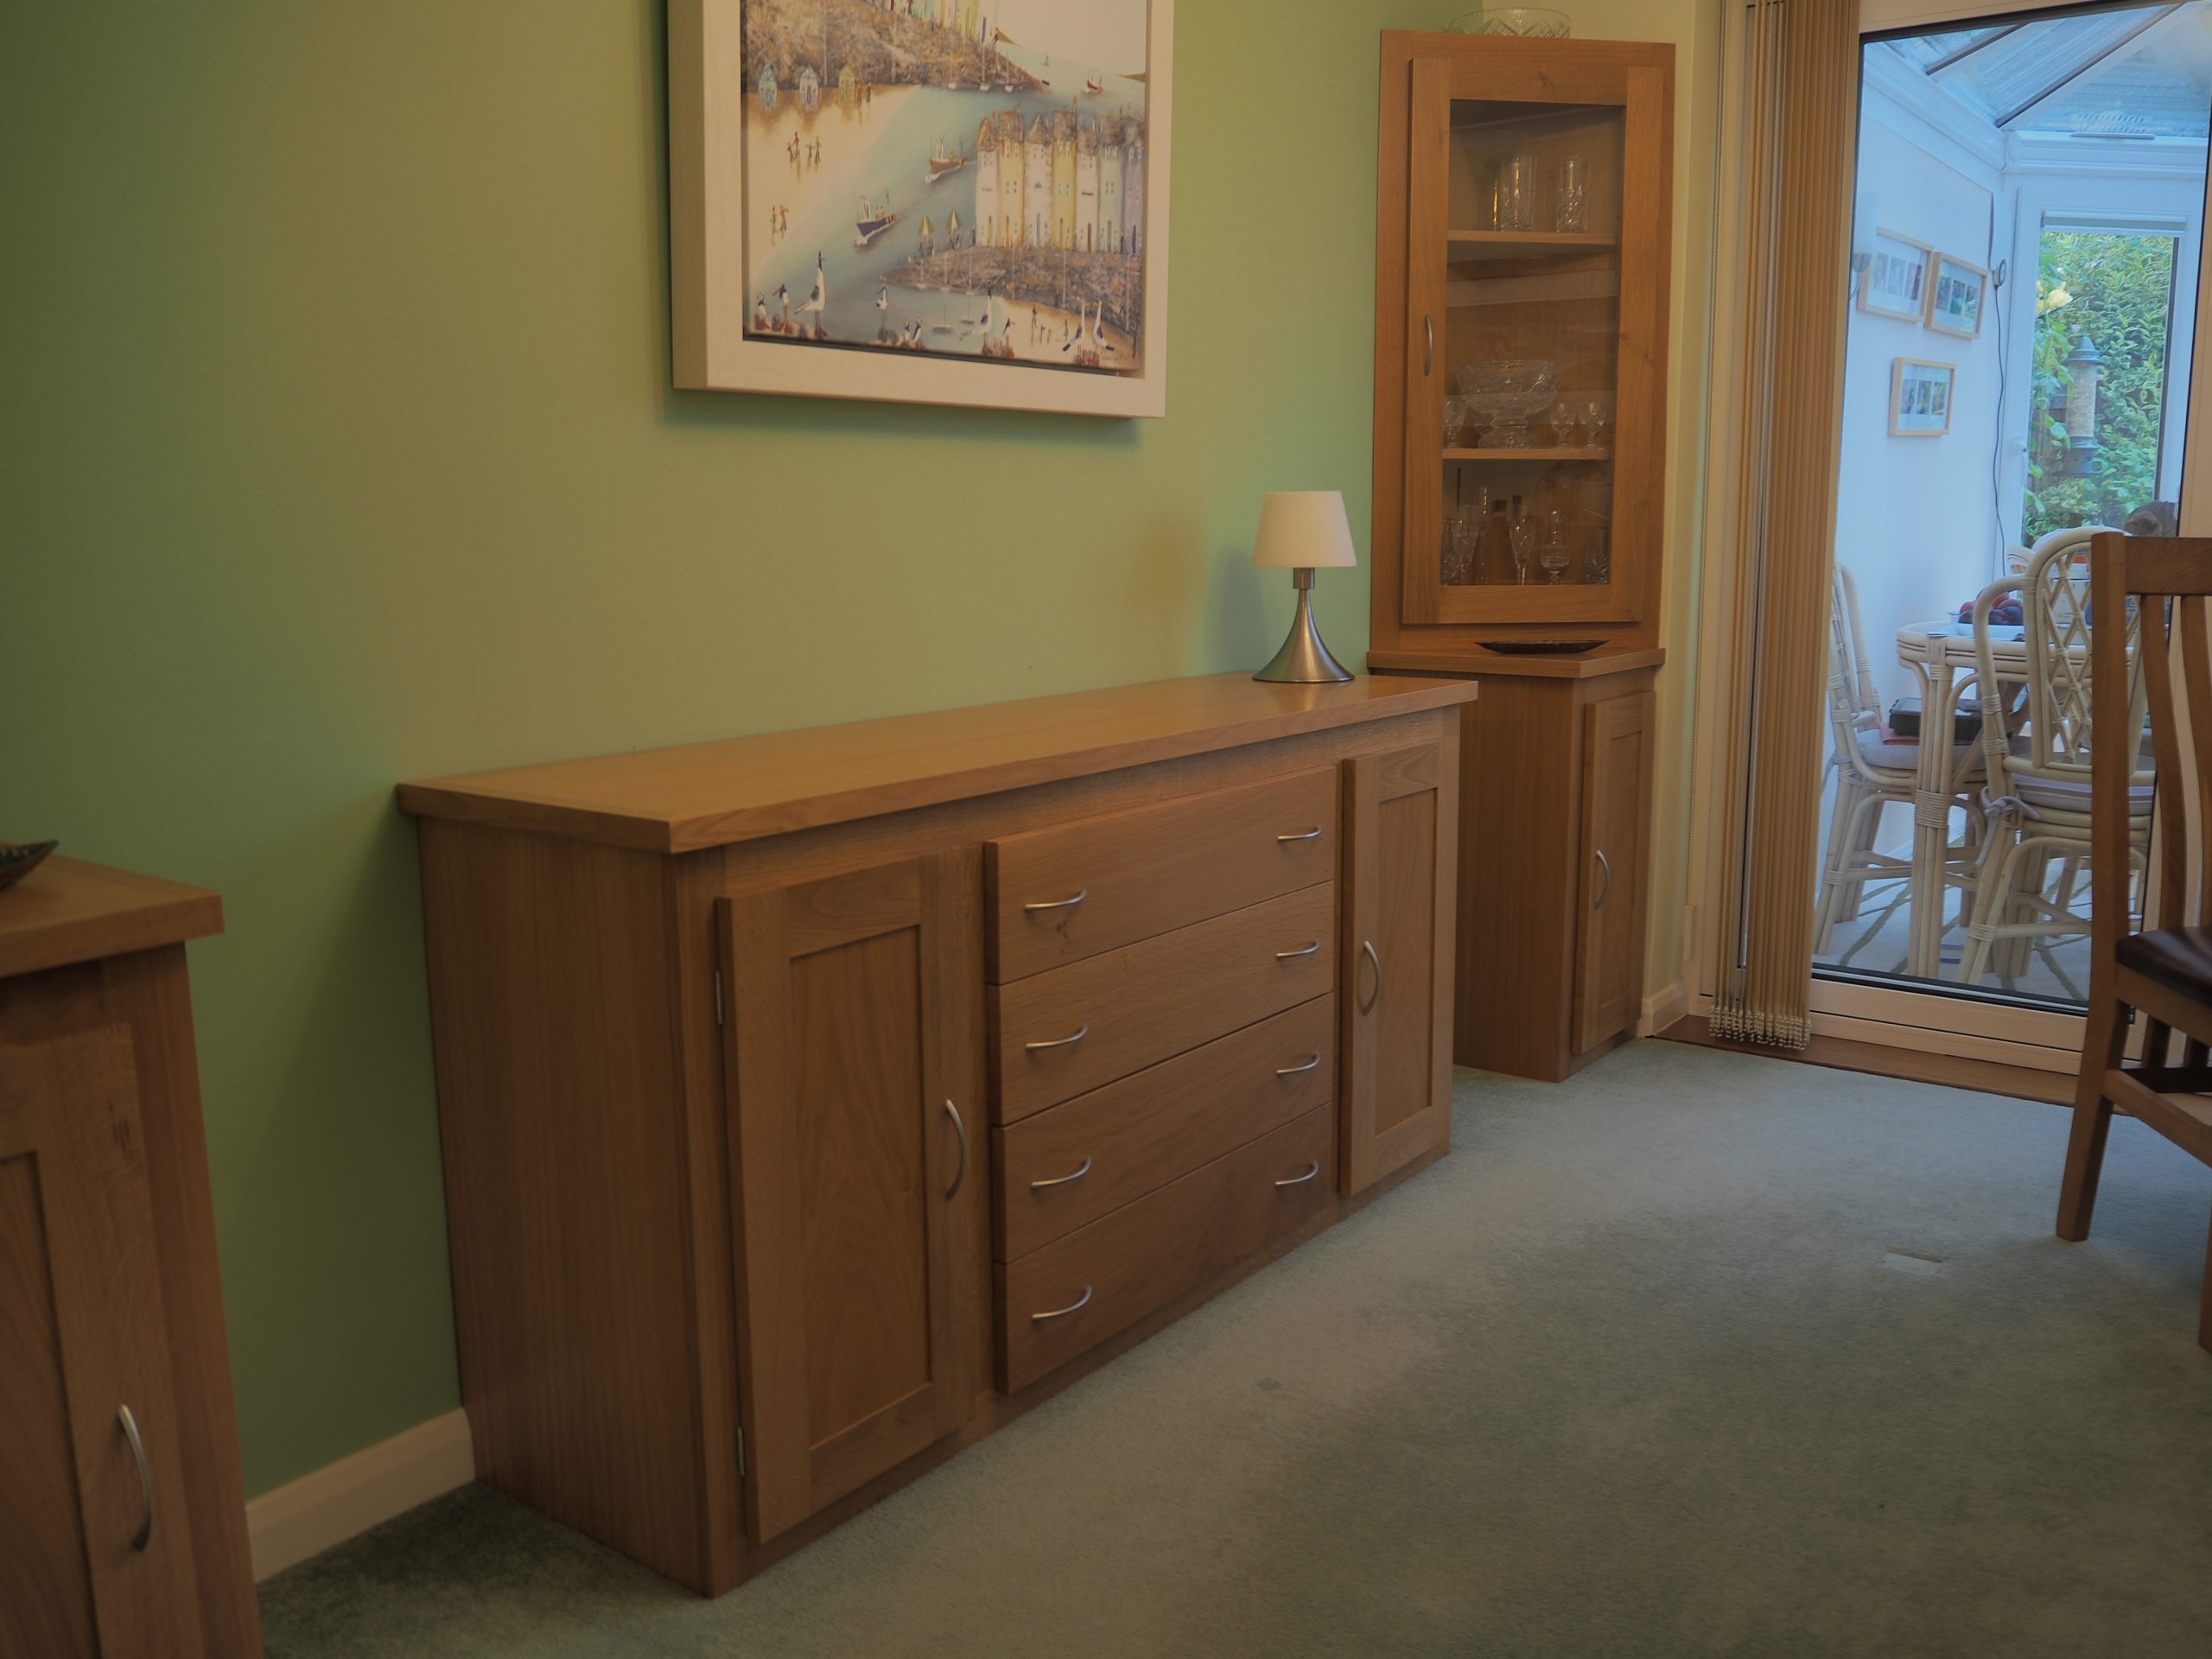 Dinning room sideboard with complementing display cabinets. Three draw Twin cupboard sideboard made in Oak with satin nickel handles. A Pair of glass fronted accompanying corner display cabinets.